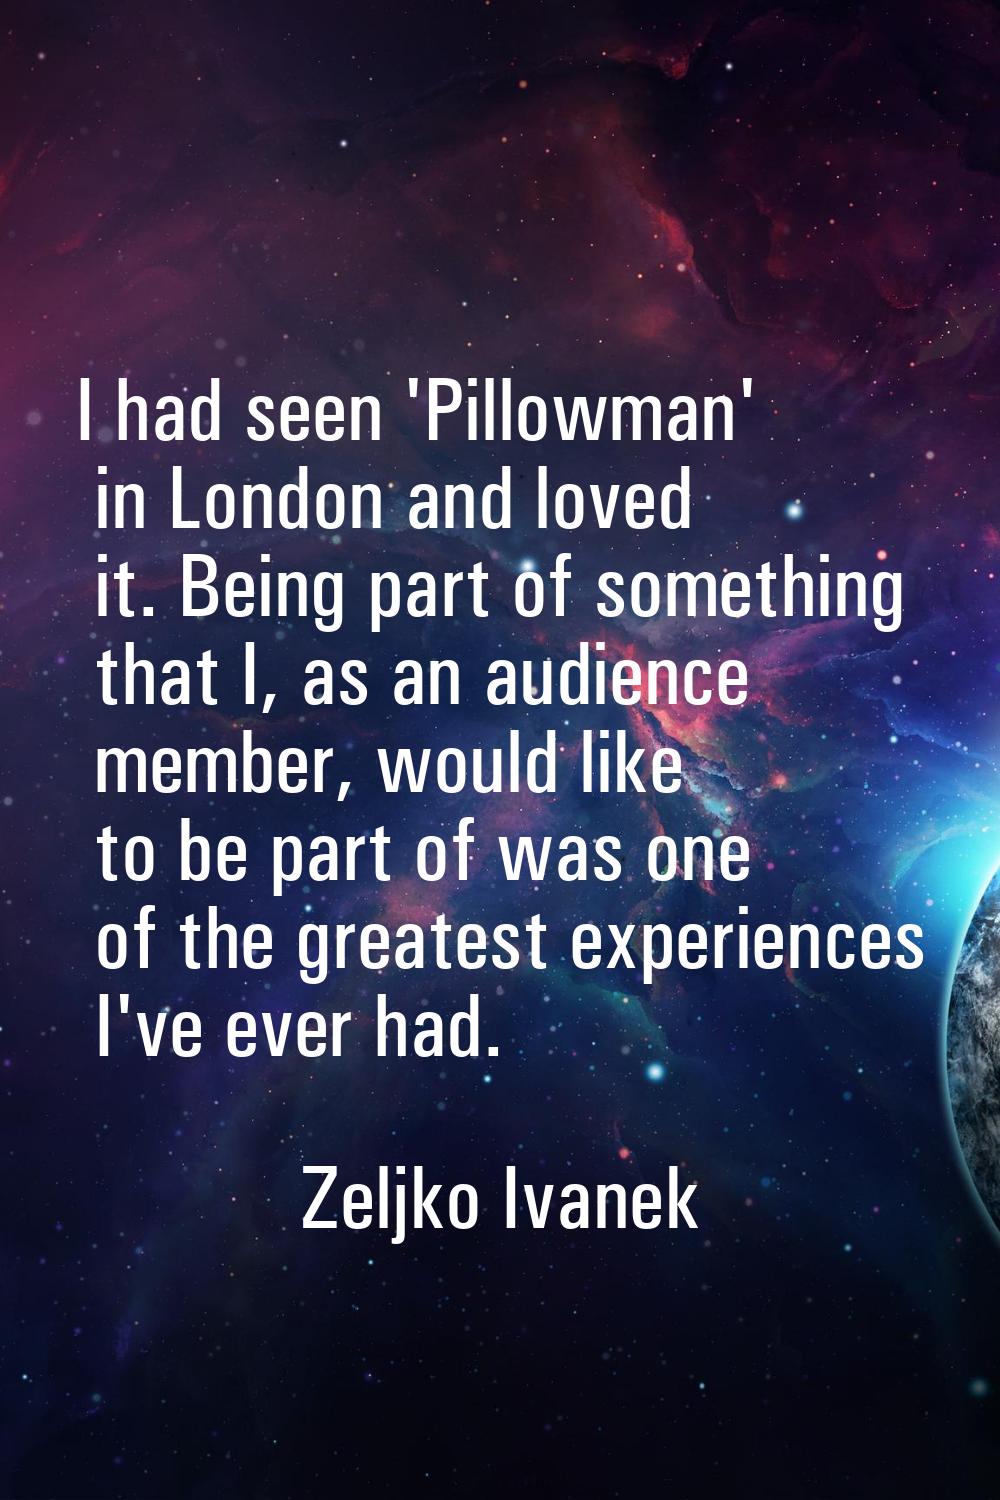 I had seen 'Pillowman' in London and loved it. Being part of something that I, as an audience membe